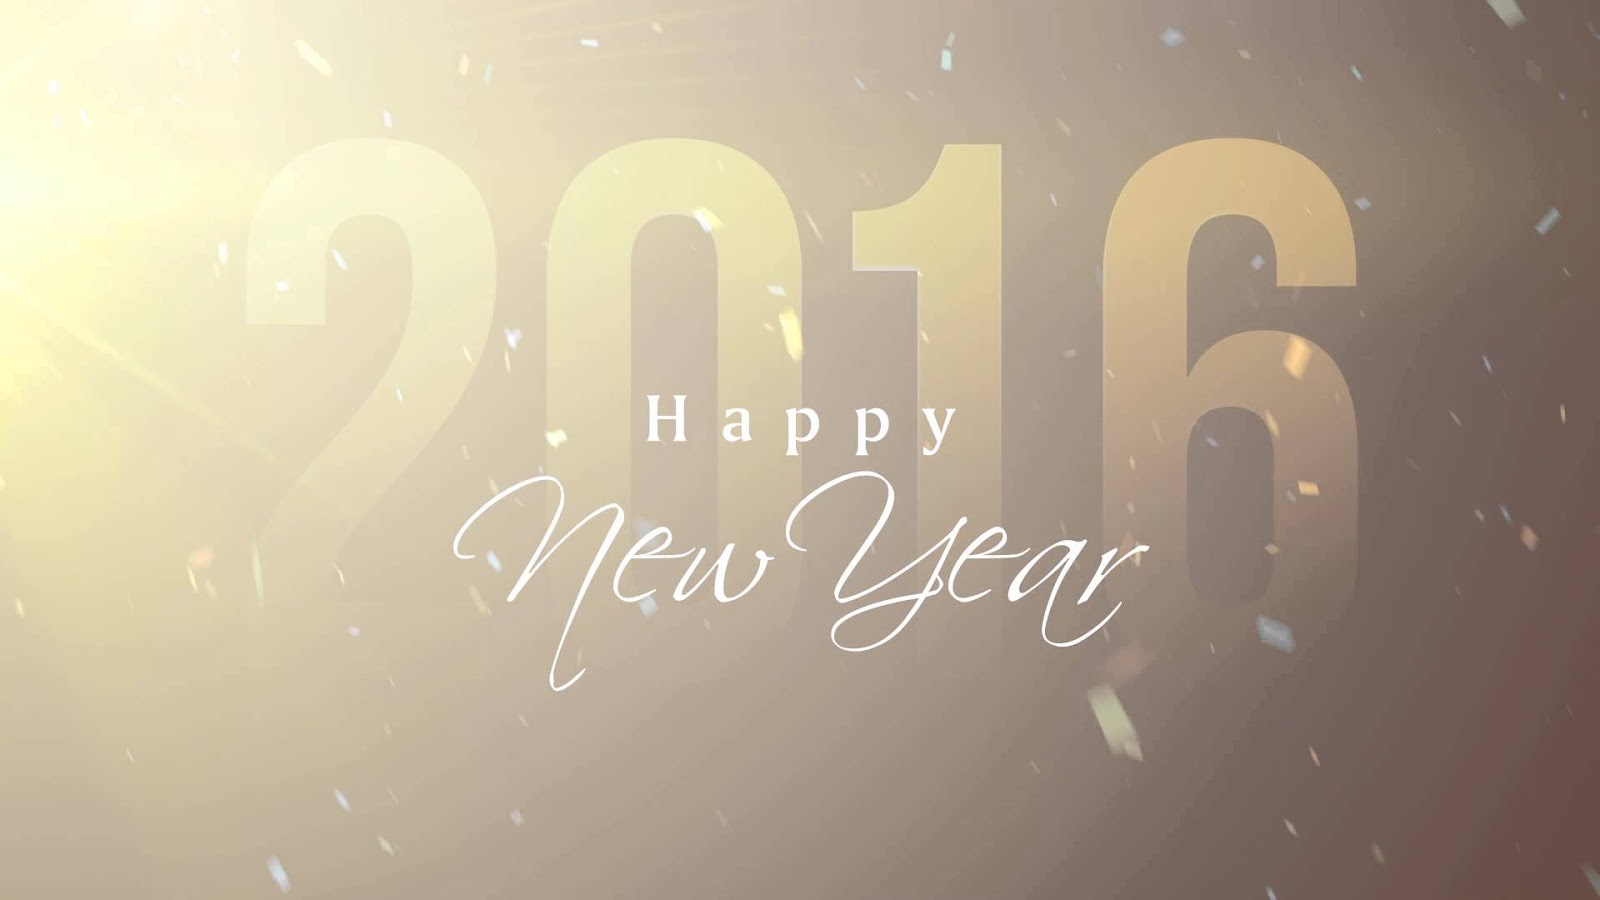 Happy New Year Images Happy New Year Wishes Wallpapers